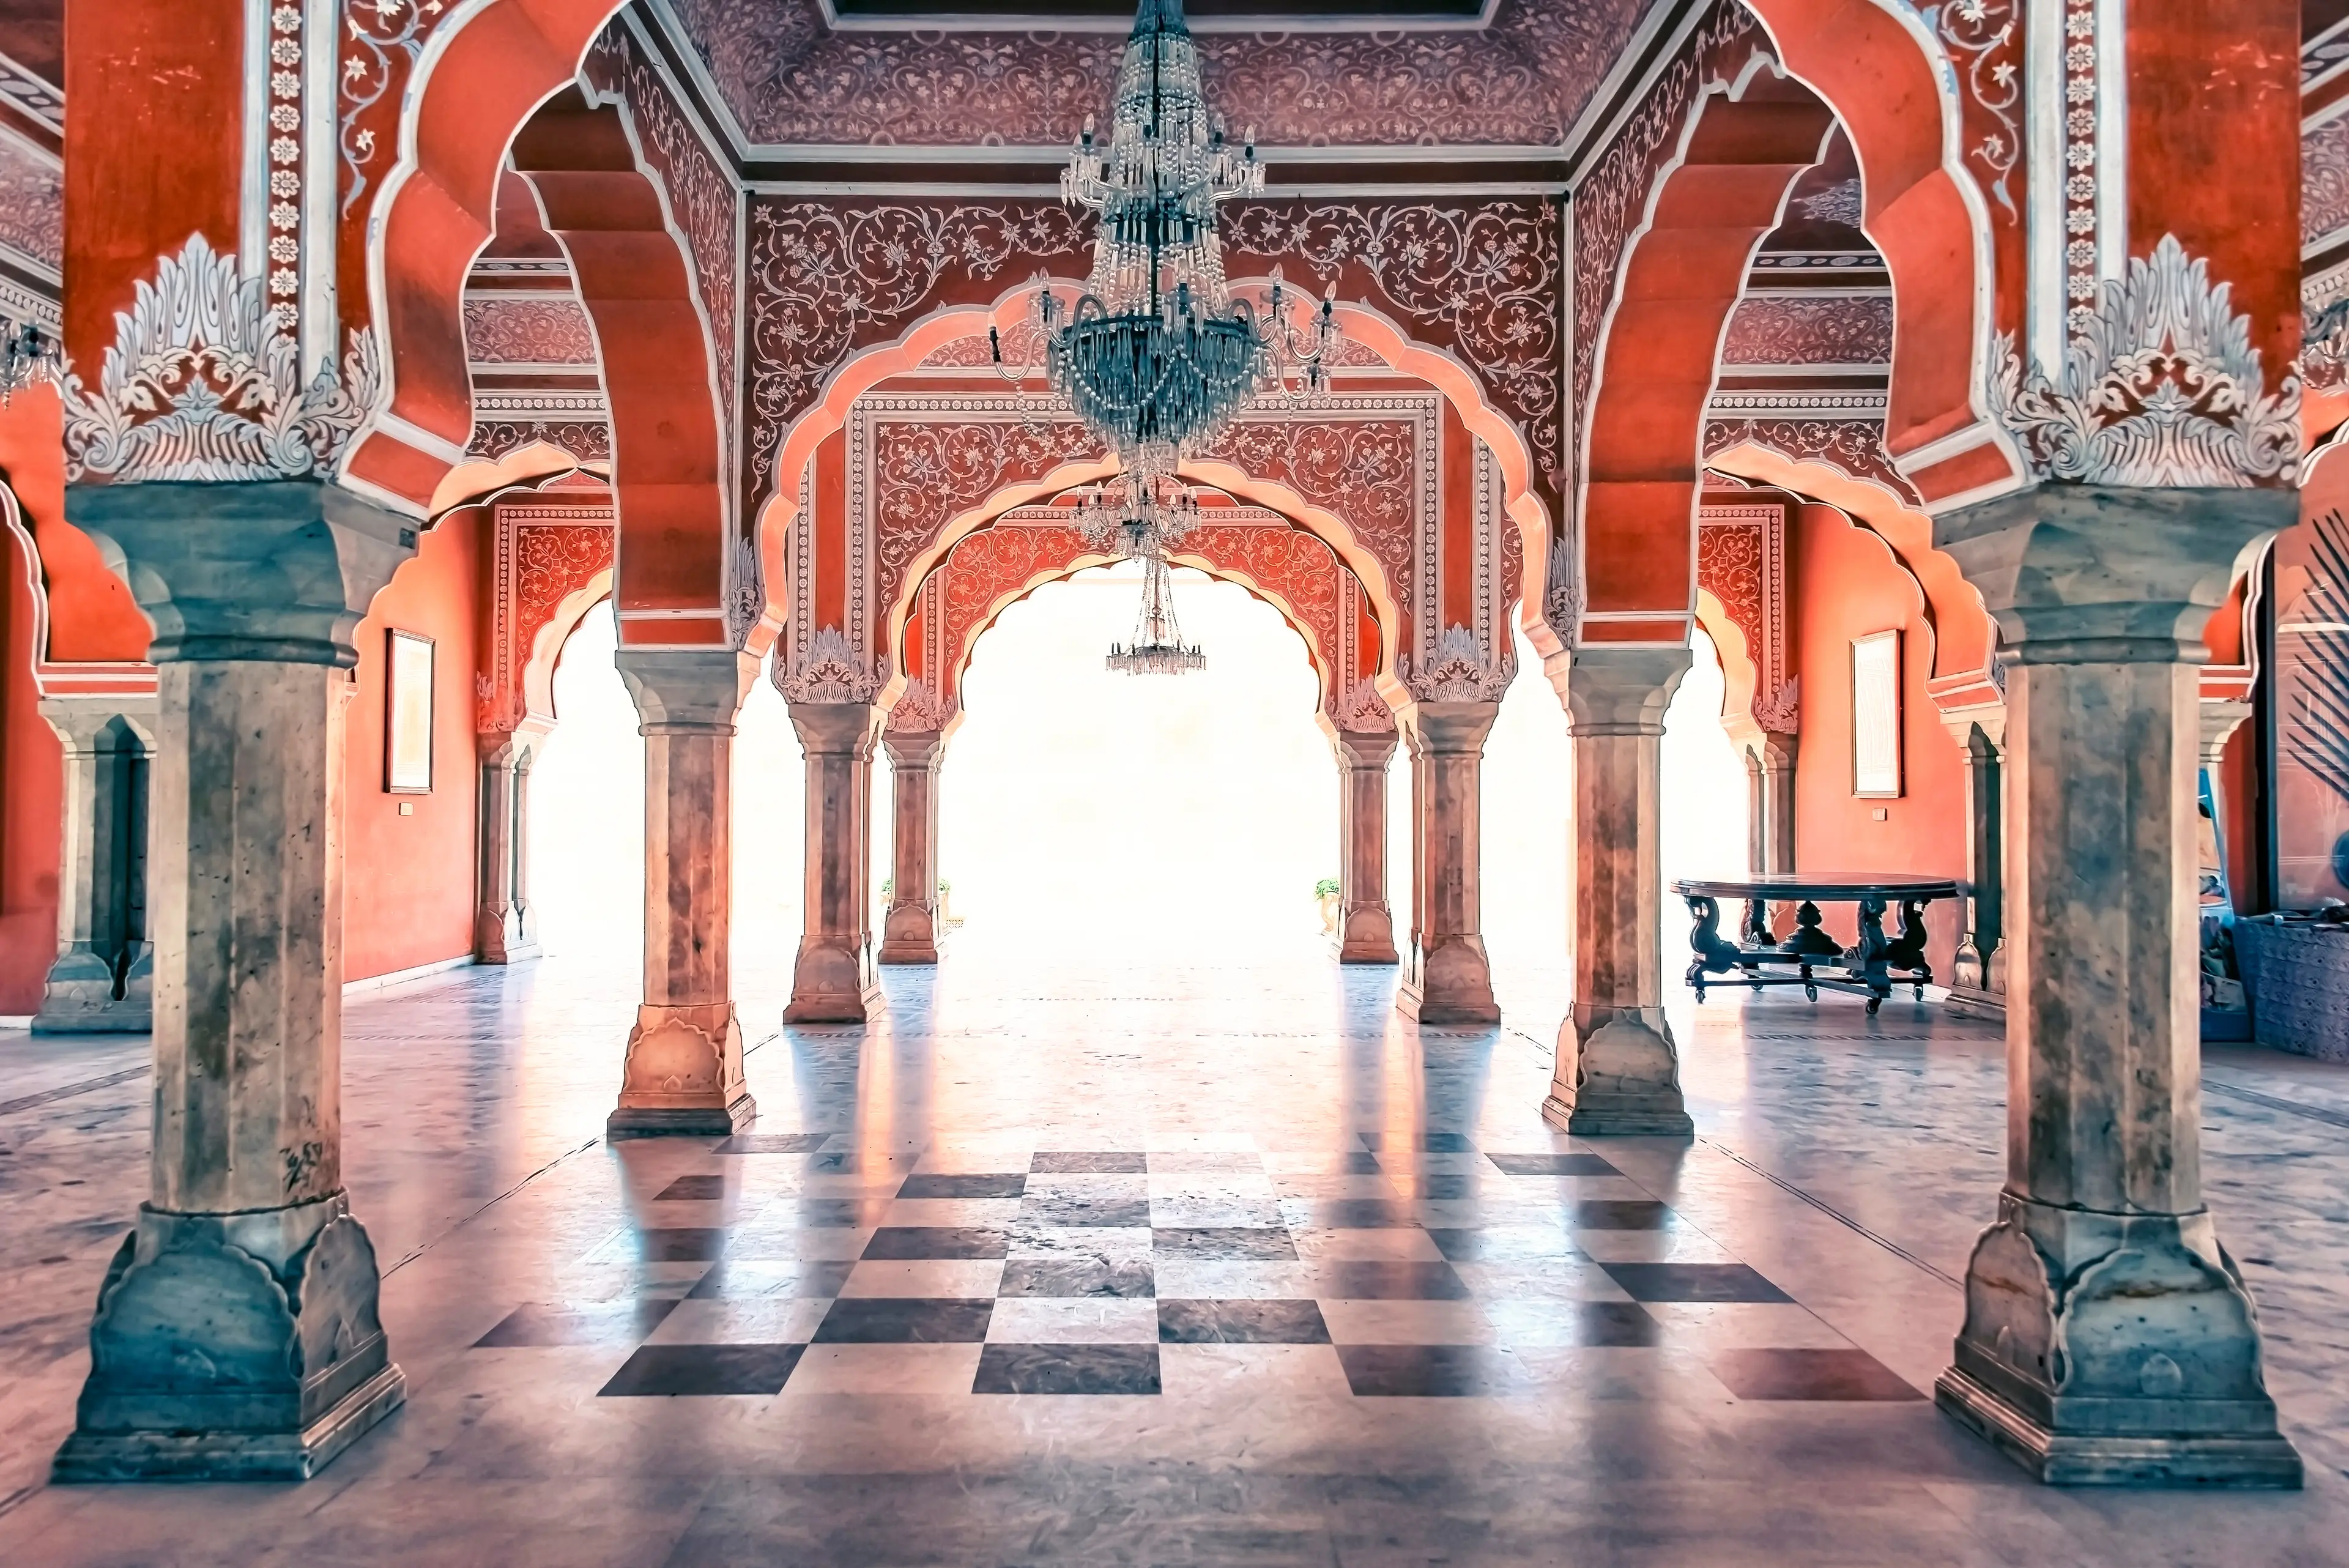 3-Day Jaipur Adventure: Local Food, Wine, Shopping, and Outdoors with Friends